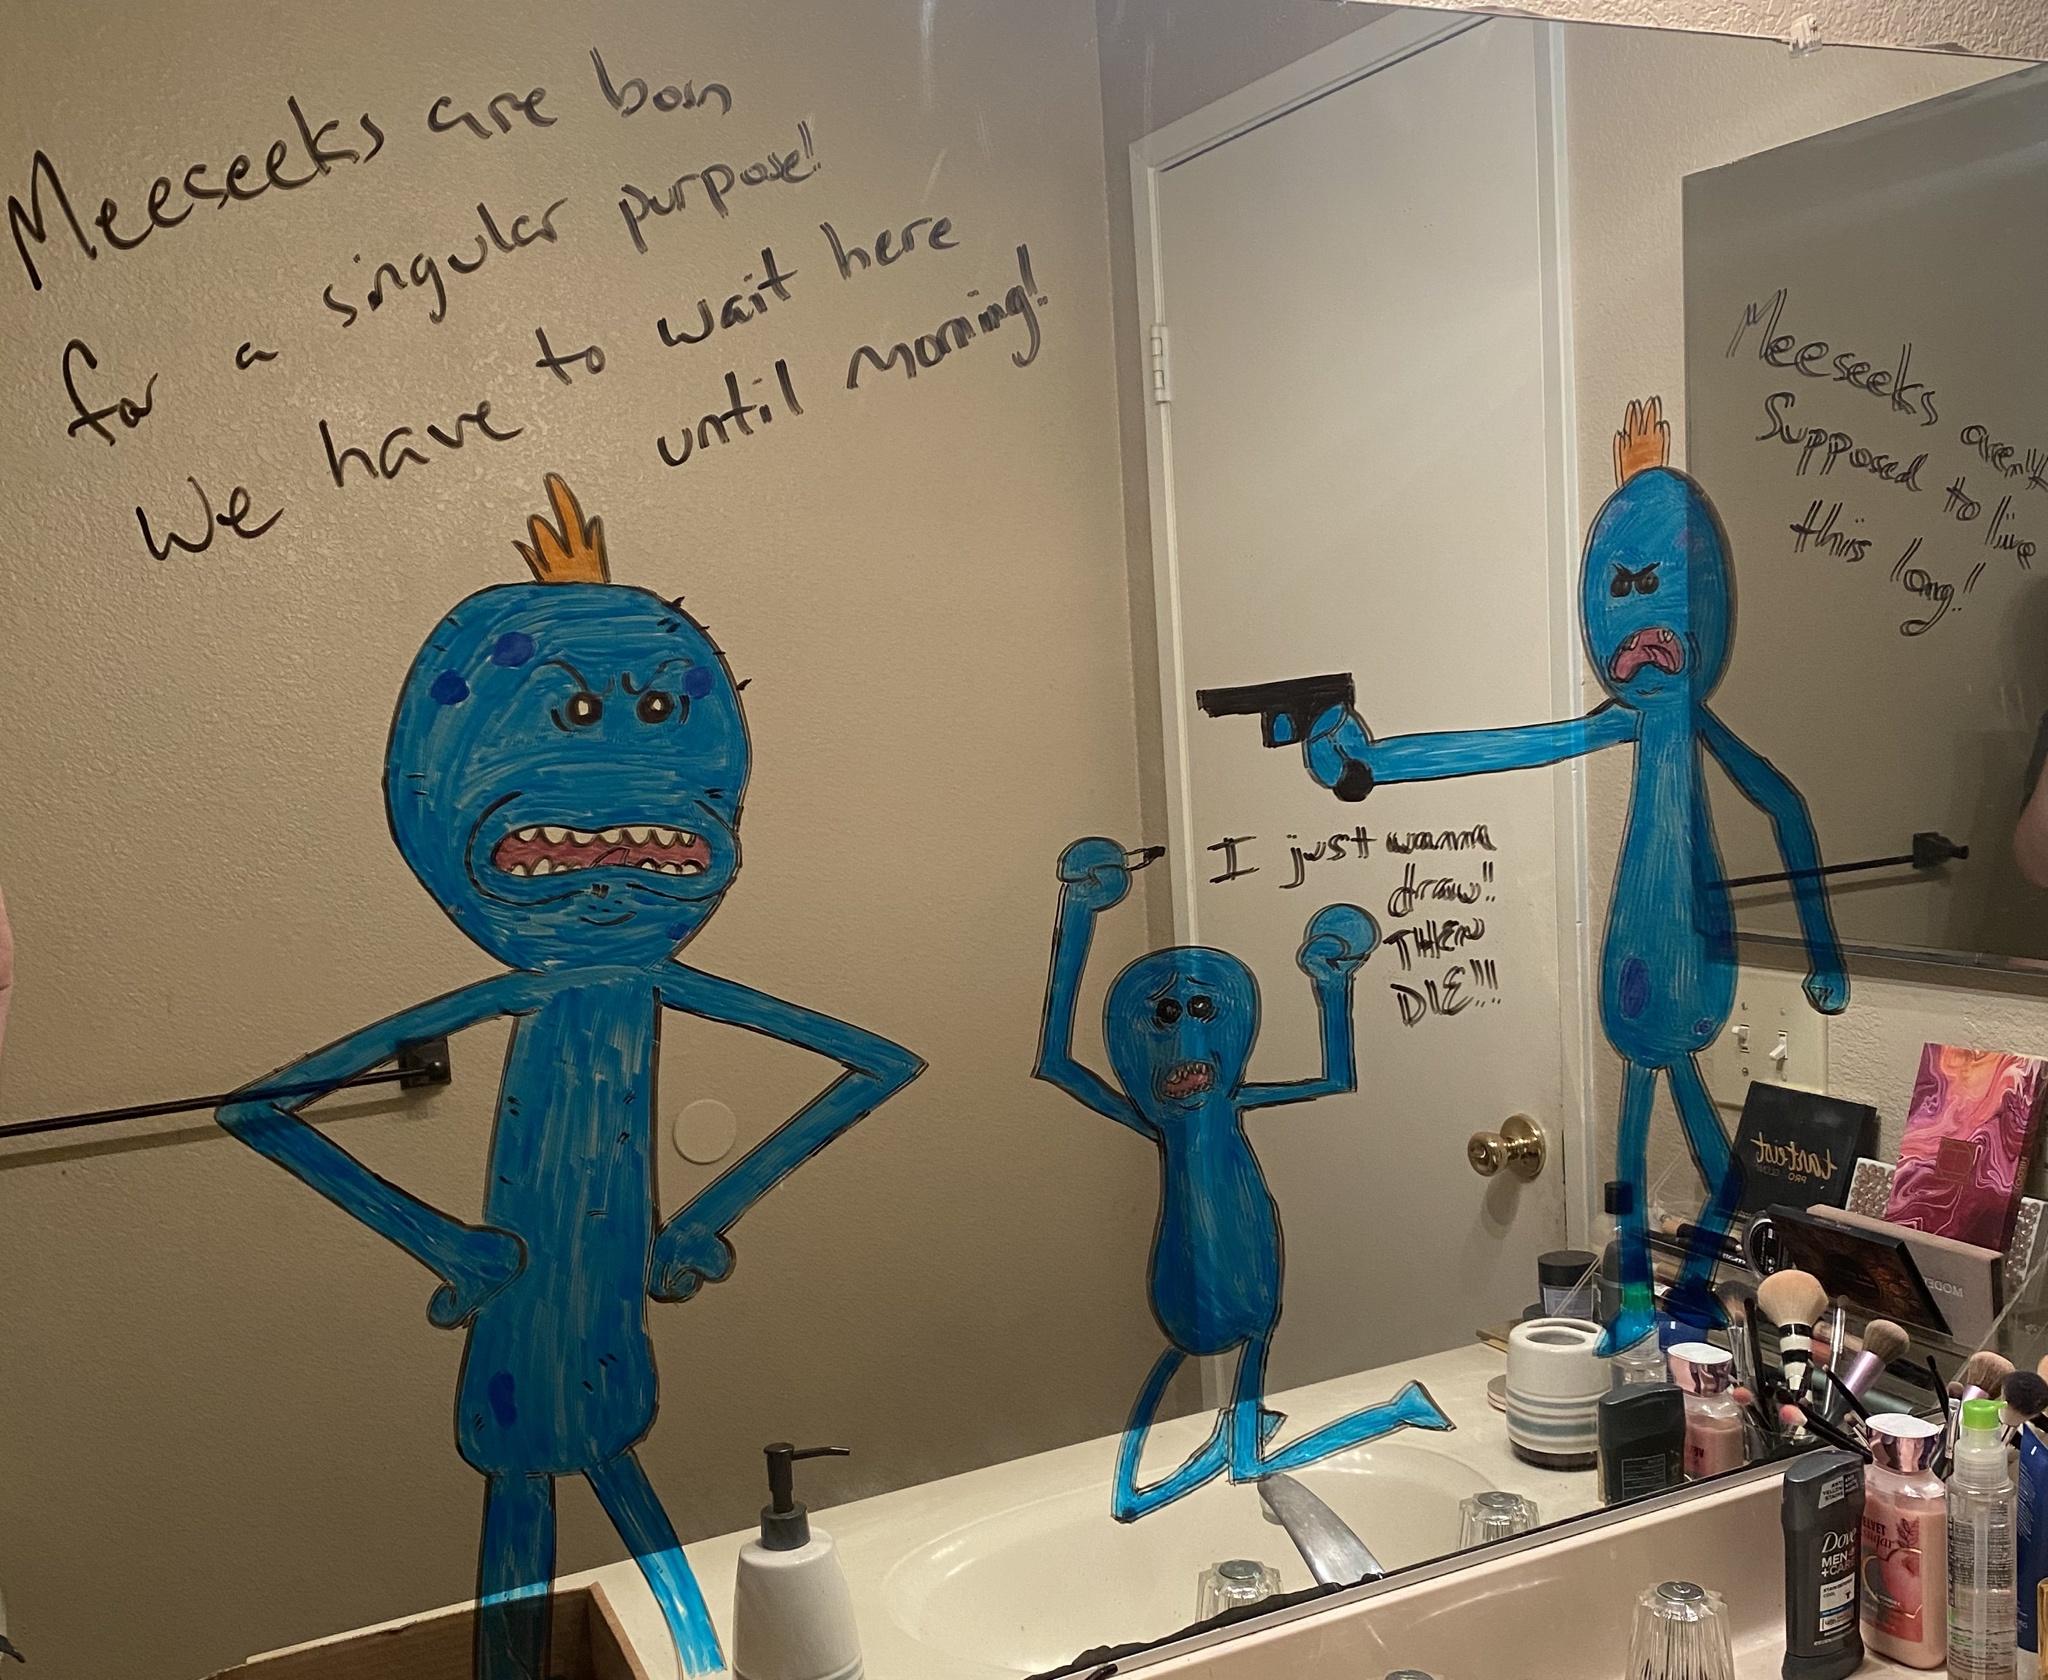 room - are bon Meeseeks singular perpose! for We have to wait here until morning! Meeseeks Supposed to lose this long log Cvevo 22.4 I just wanna draw The Shaw